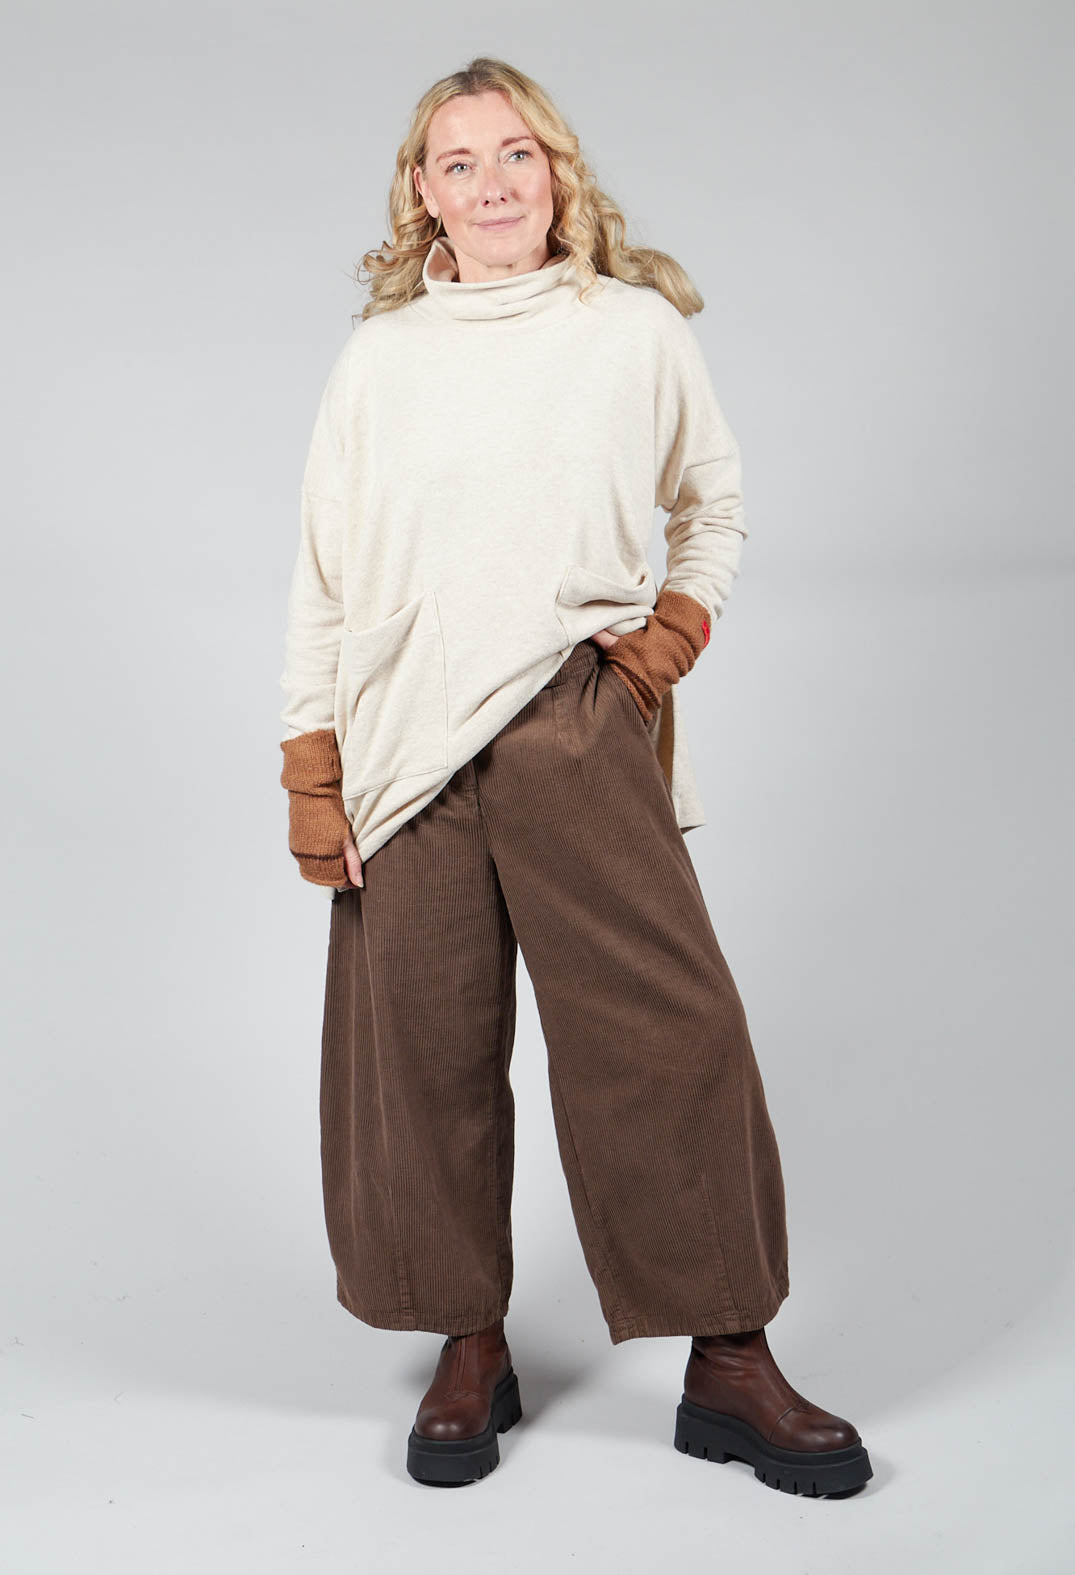 Cabal Trousers in Taupe